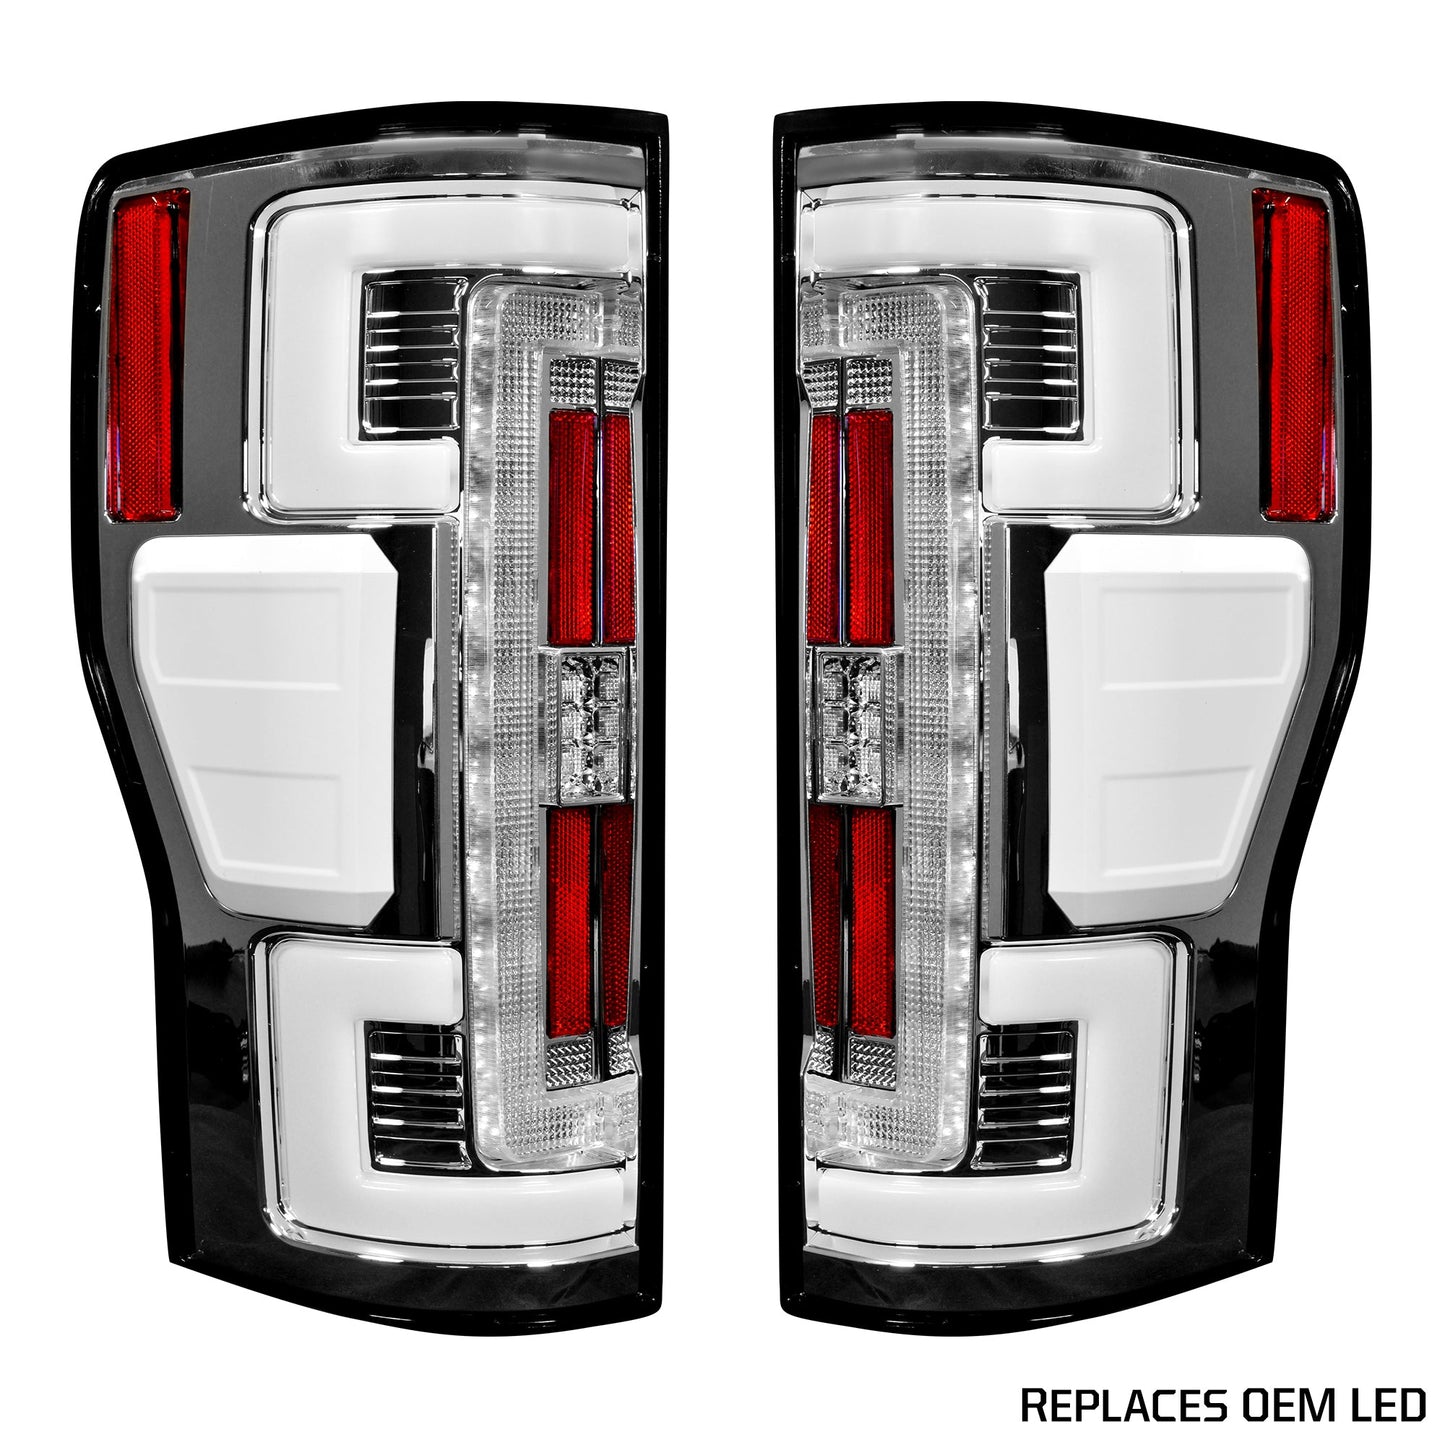 Ford Superduty F250/F350/F450 2020-2022 (Replaces OEM LED Style Tail Lights with BLIS Blind Spot Warning System) OLED TAIL LIGHTS